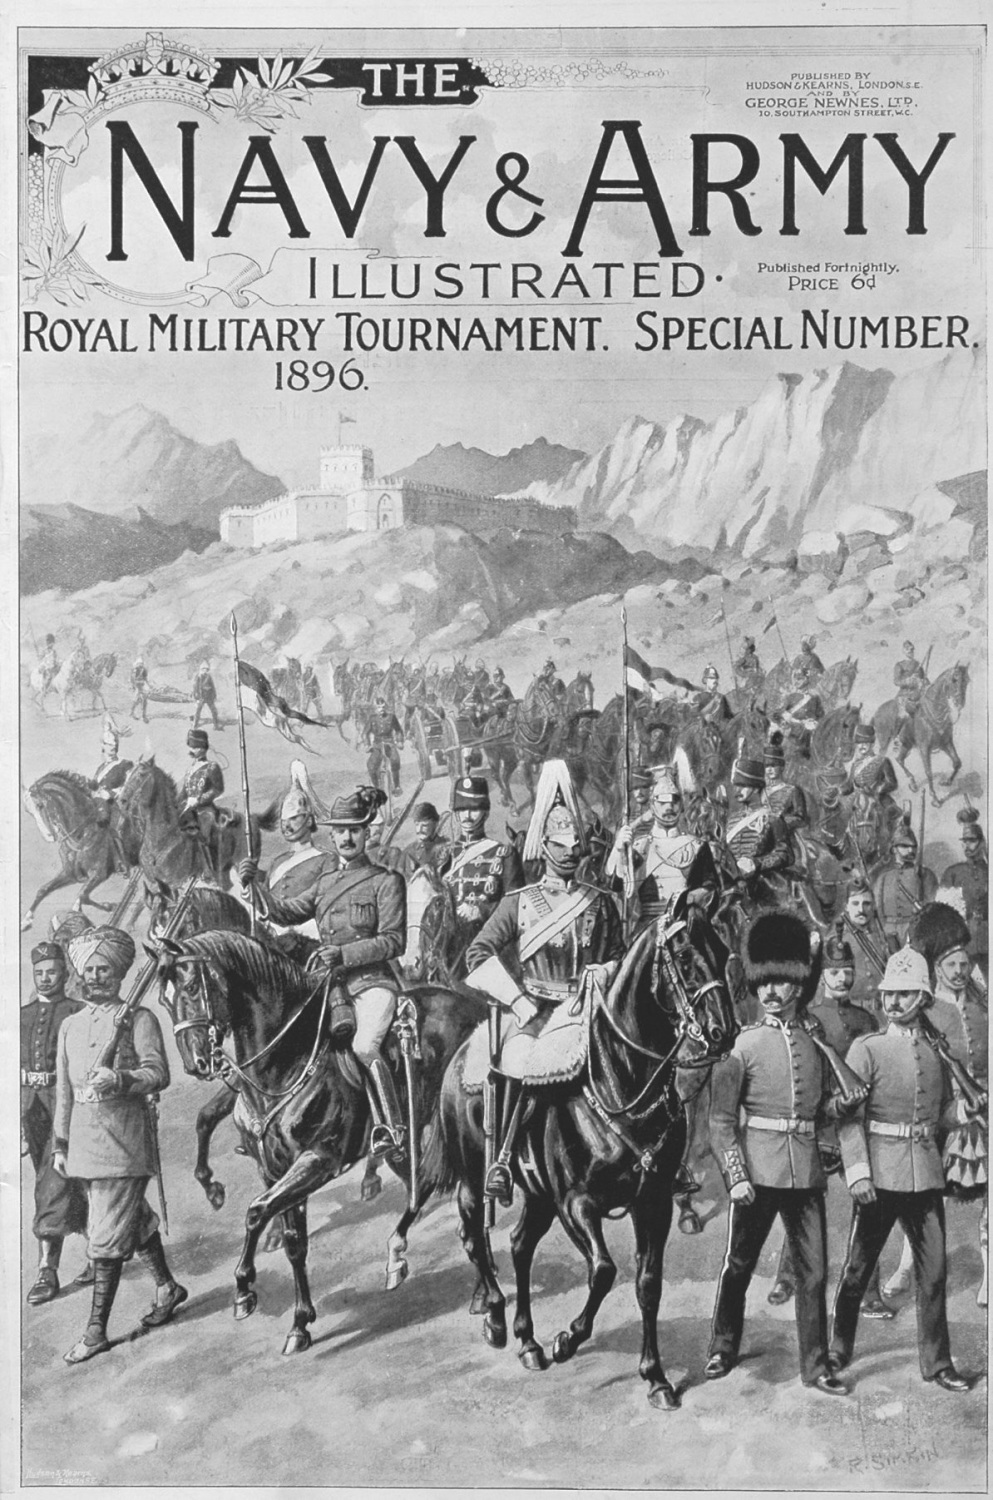 Navy & Army Illustrated. Royal Military Tournament. 1896.